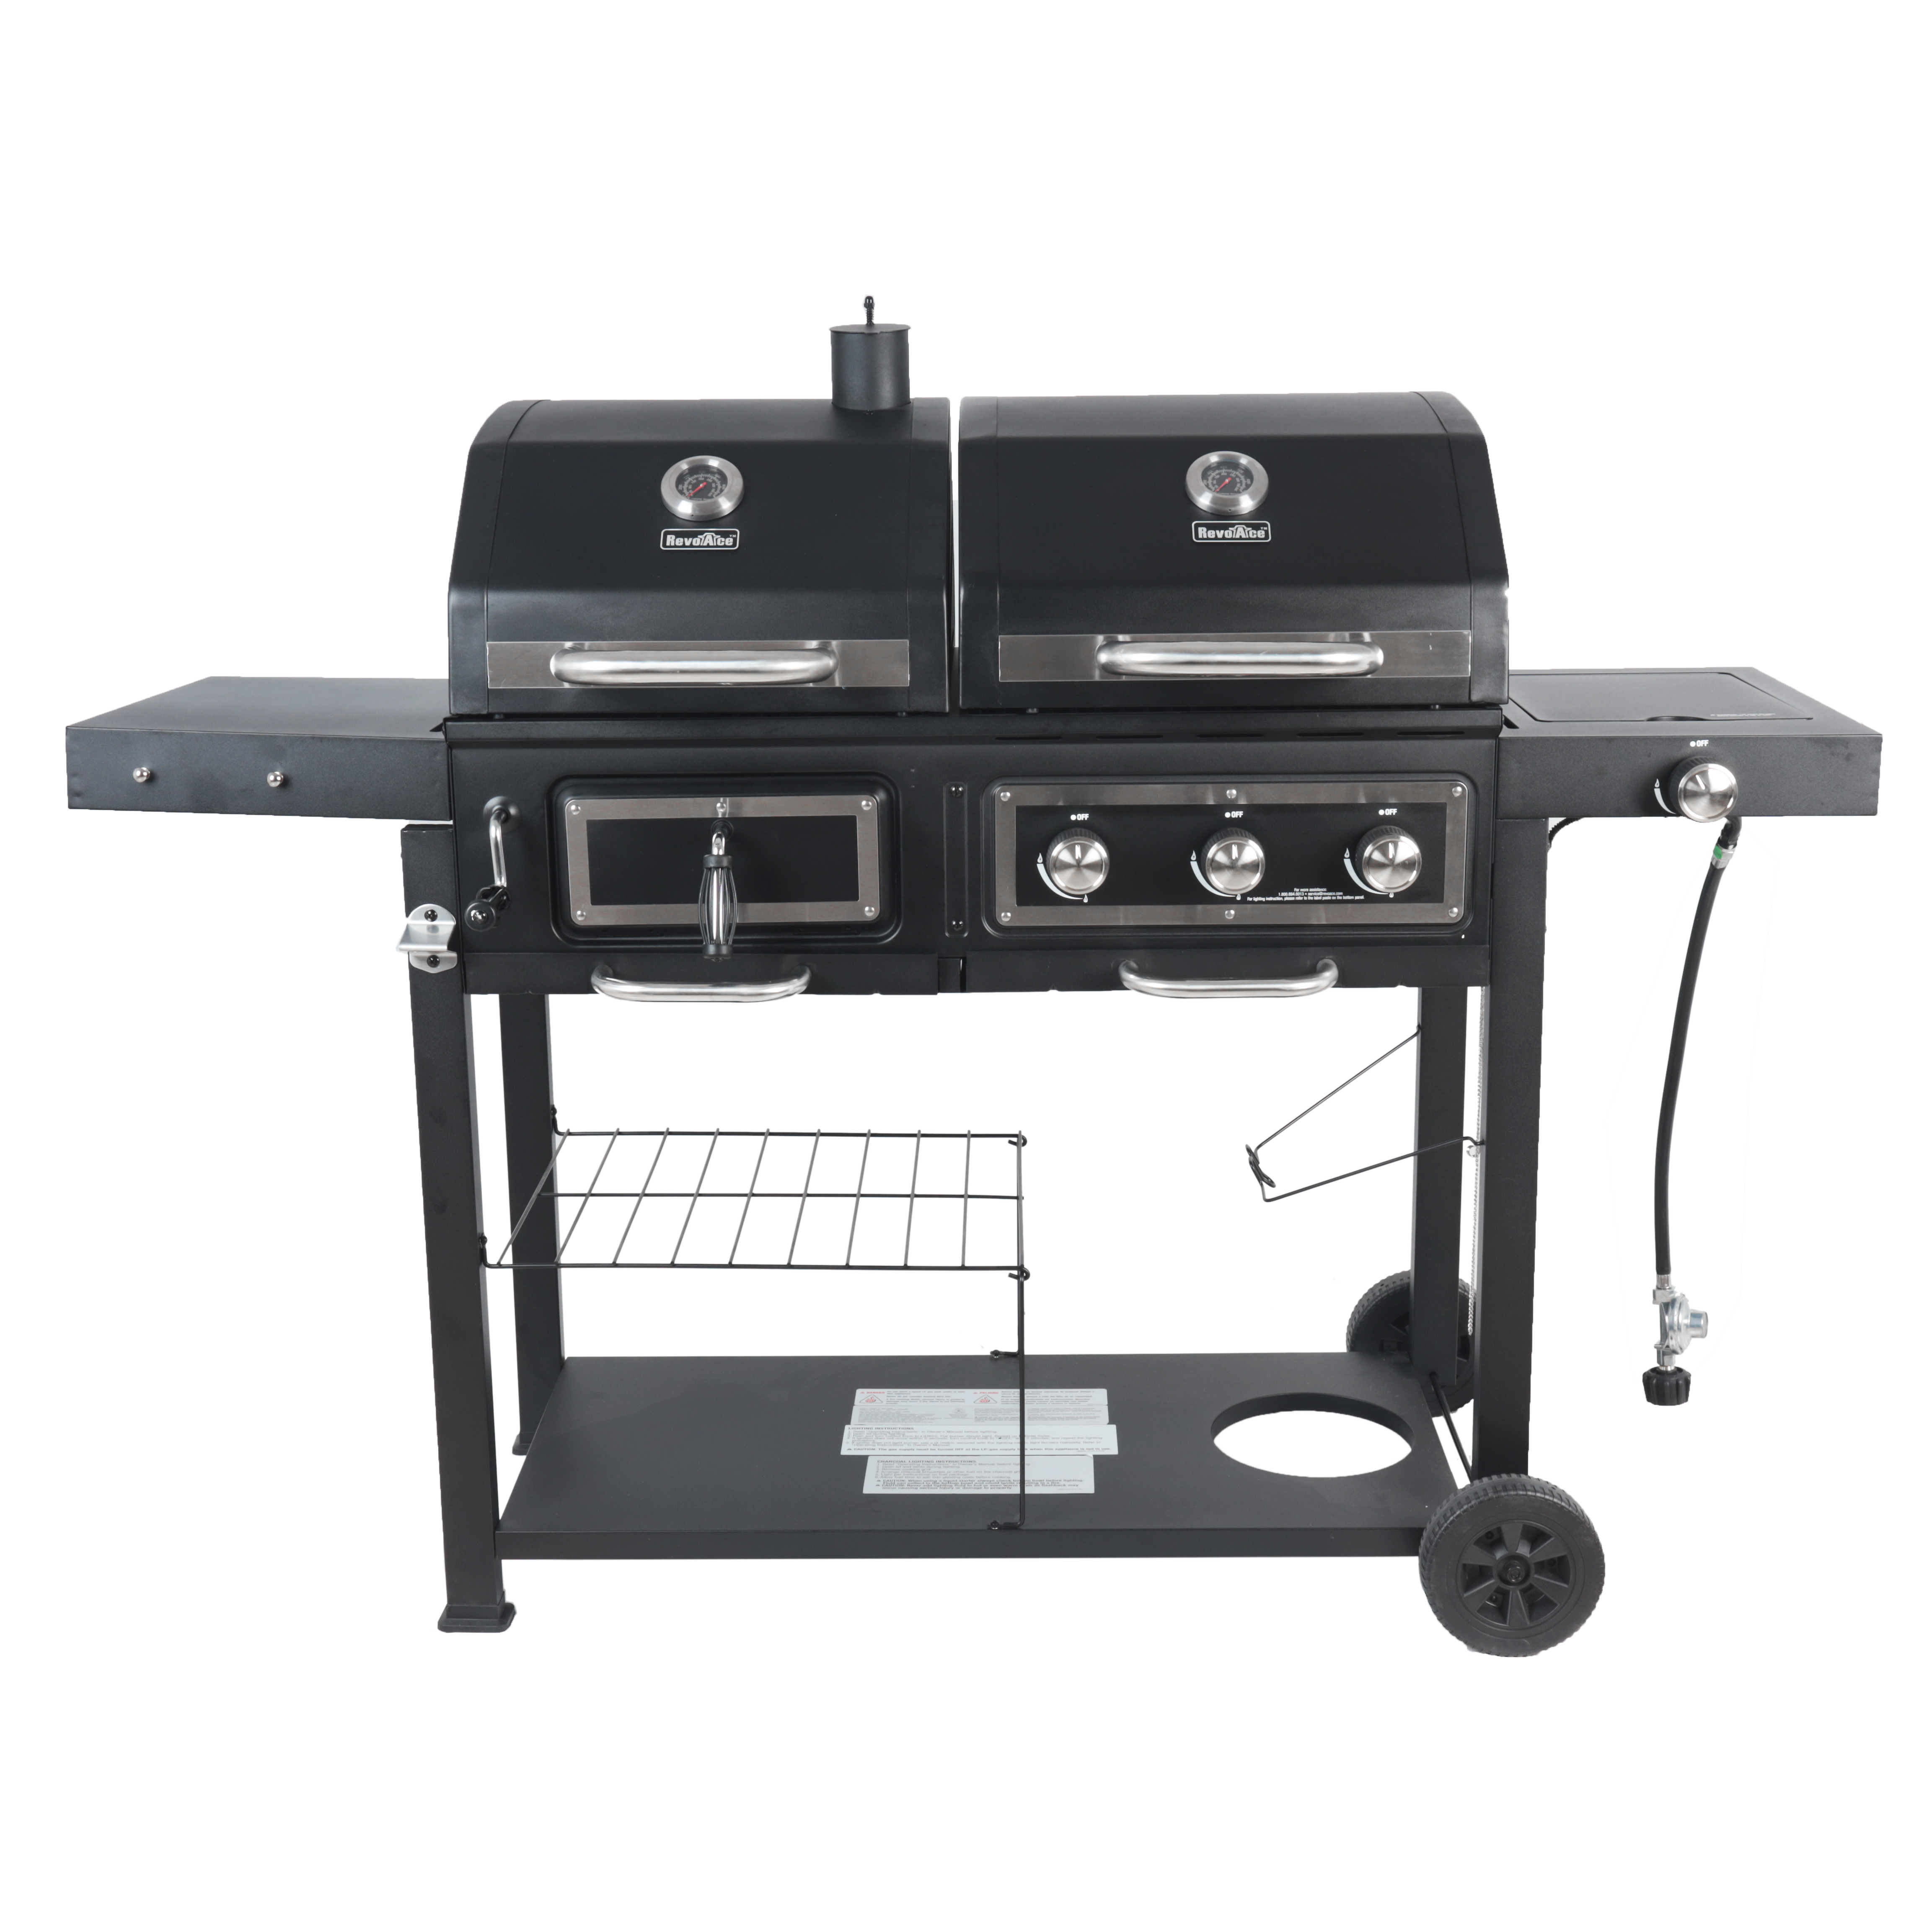 RevoAce Dual Fuel Gas & Charcoal Combo Grill, Black with Stainless - image 1 of 21